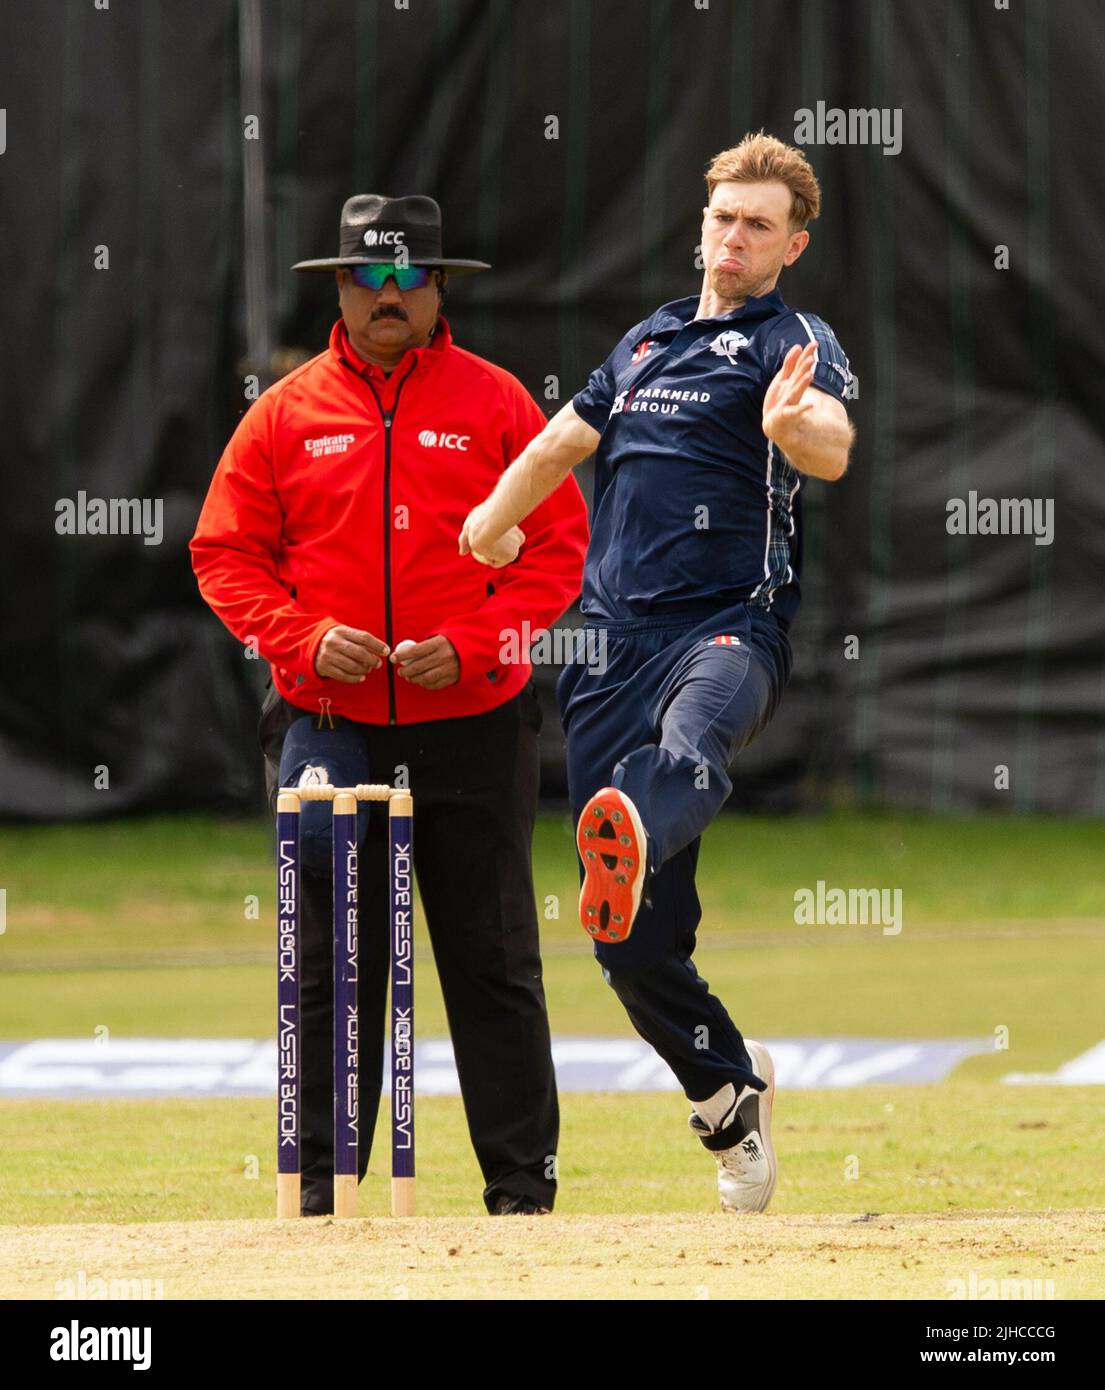 ICC Men's Cricket World Cup League 2 - Scotland v, Nepal. 17th July, 2022. Scotland take on Nepal for the second time in the ICC Div 2 Men's Cricket World Cup League 2 at Titwood, Glasgow. Pic shows: Scotland's Gavin Main bowls, Credit: Ian Jacobs/Alamy Live News Stock Photo